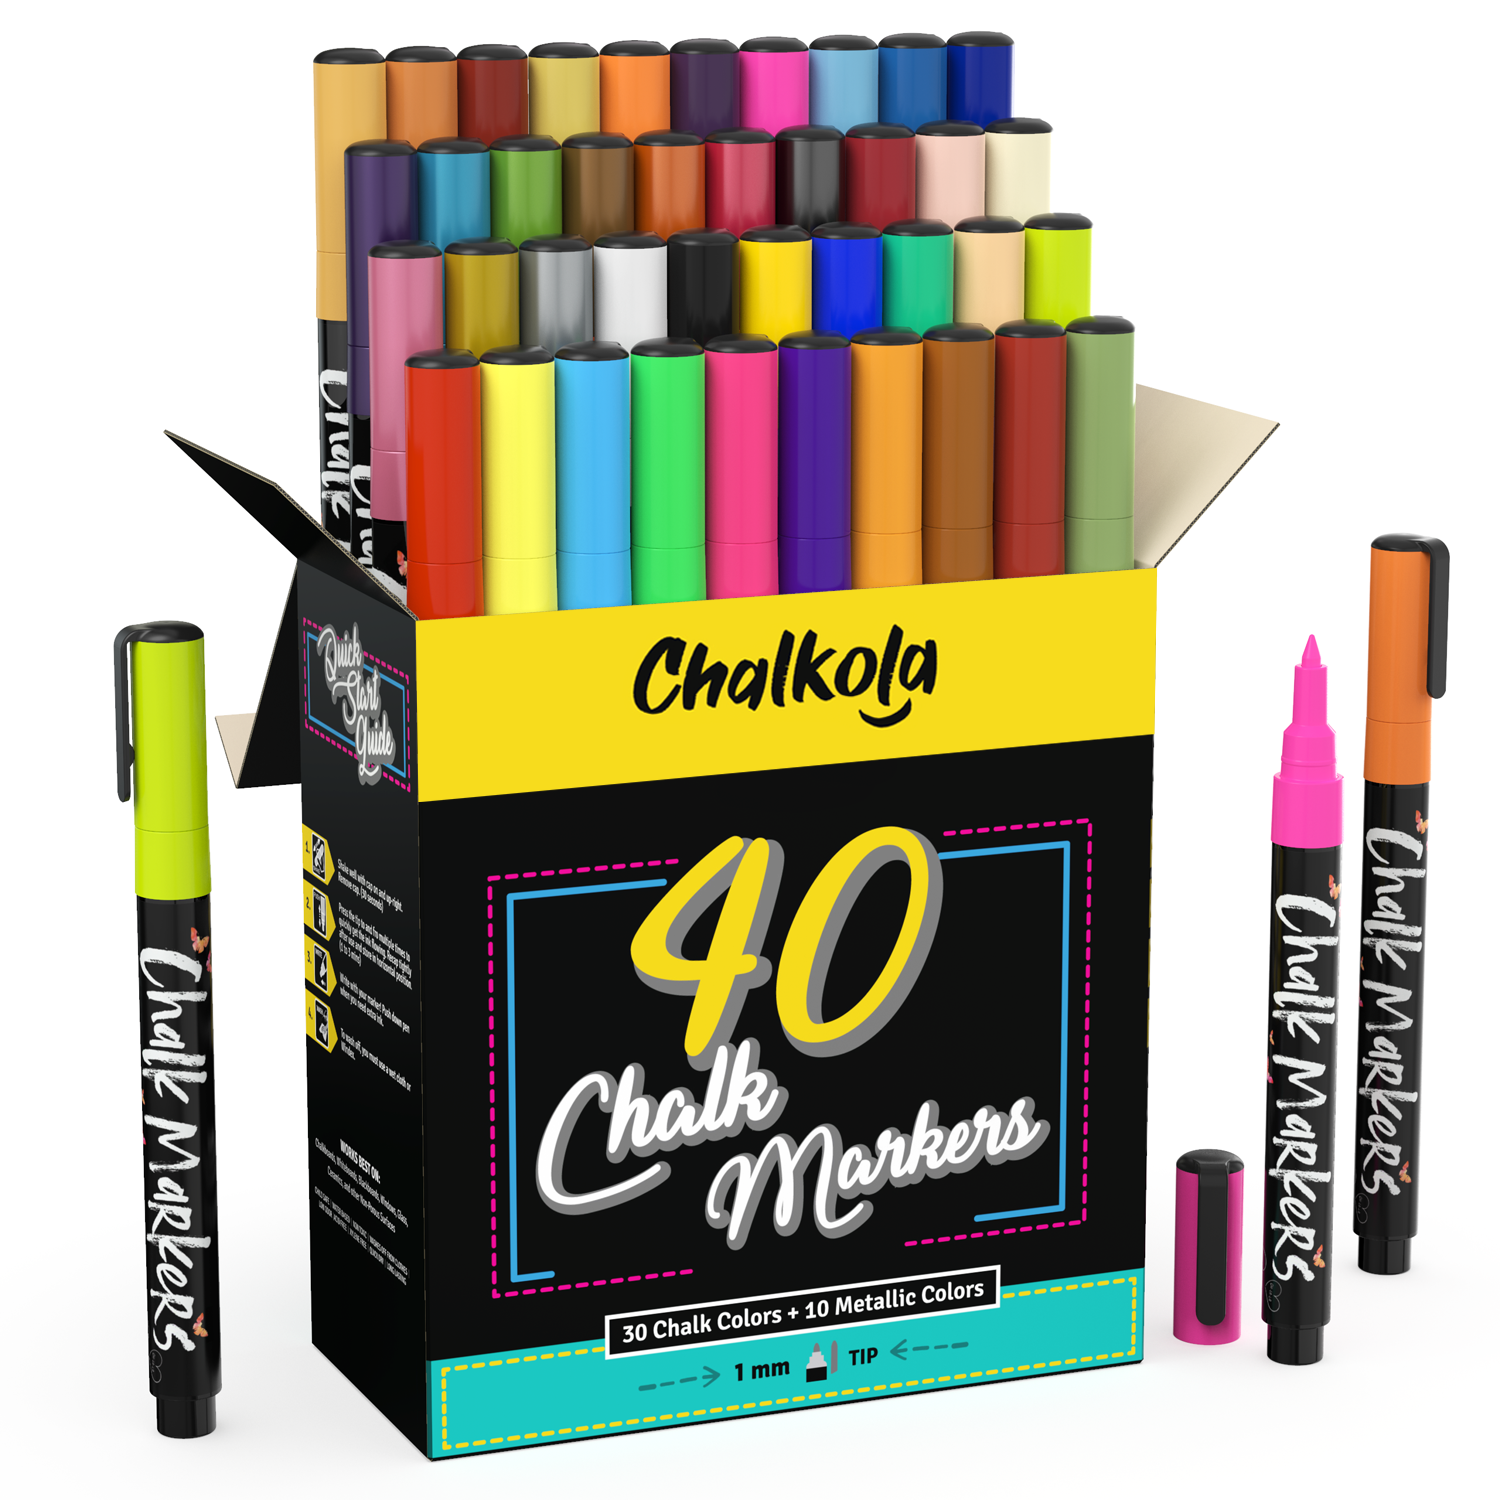 Colorations 8 x 10 Canvas Panel Classroom Pack - 30